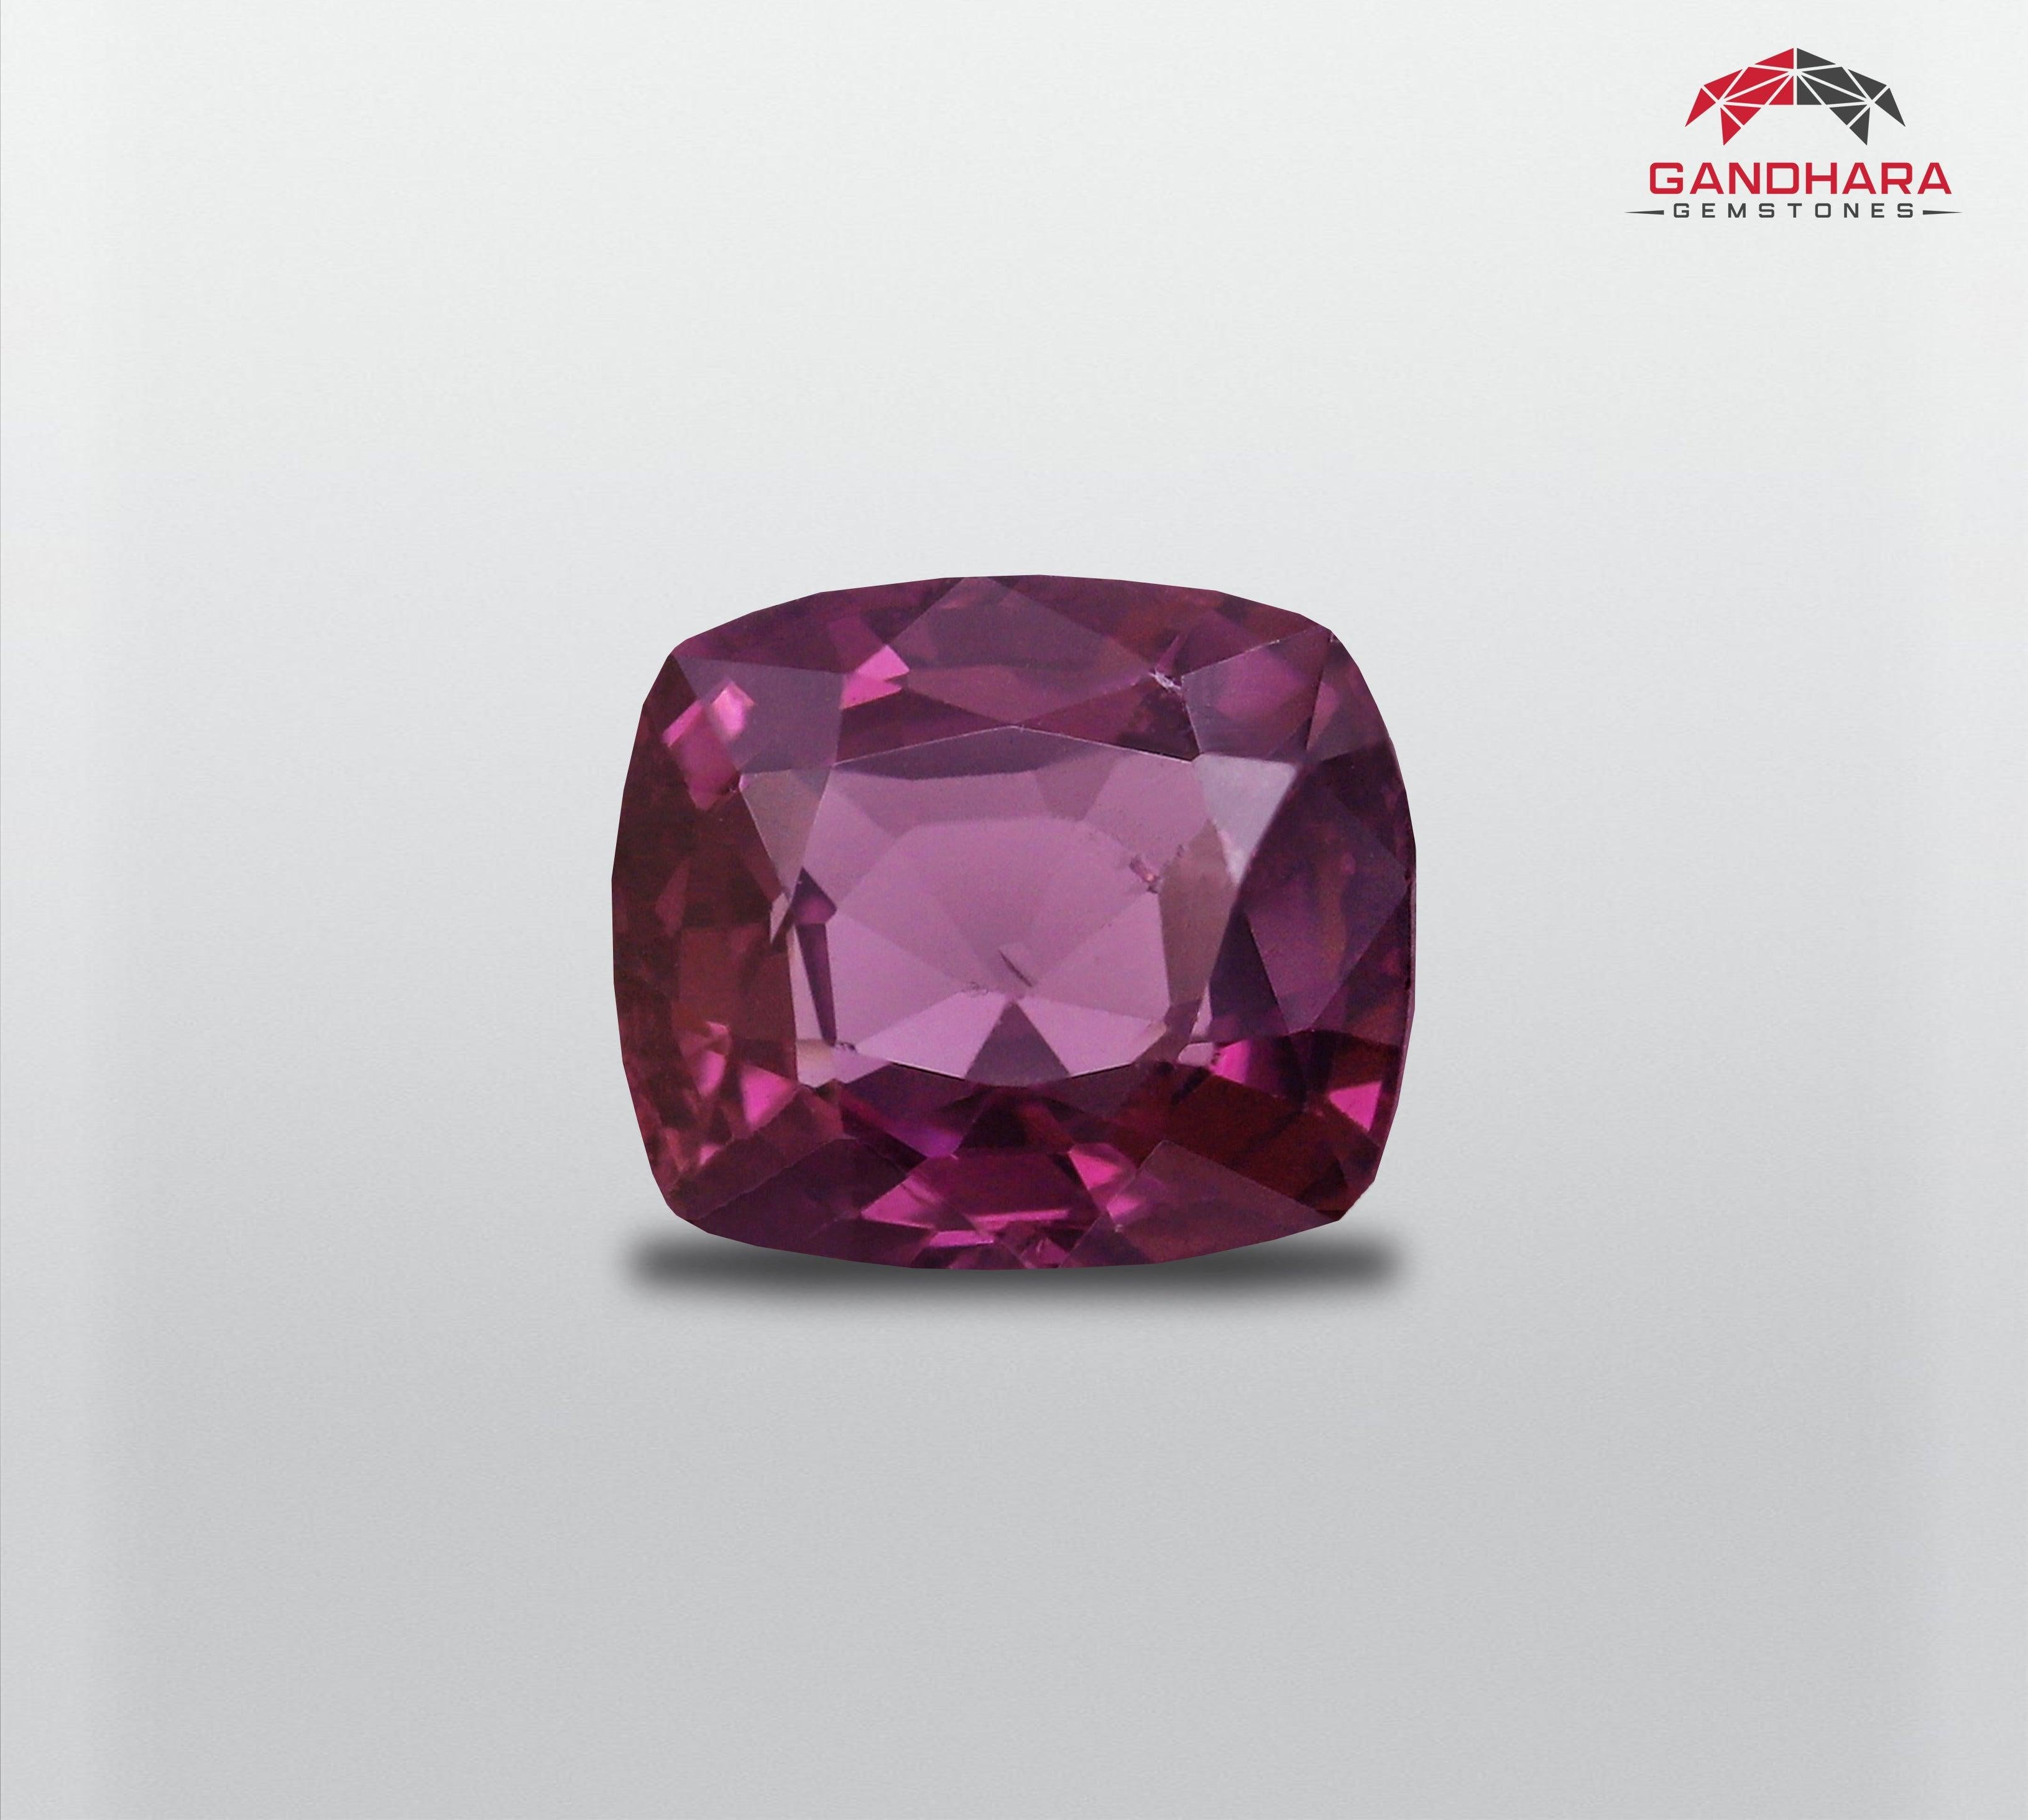 Pinkish Purple Spinel For Ring of 1.61 carats from Burma has a wonderful cut in a Cushion shape, incredible Pinkish Purple color. Great brilliance. This gem is SI Clarity.

Product Information:
GEMSTONE TYPE:	Pinkish Purple Spinel For